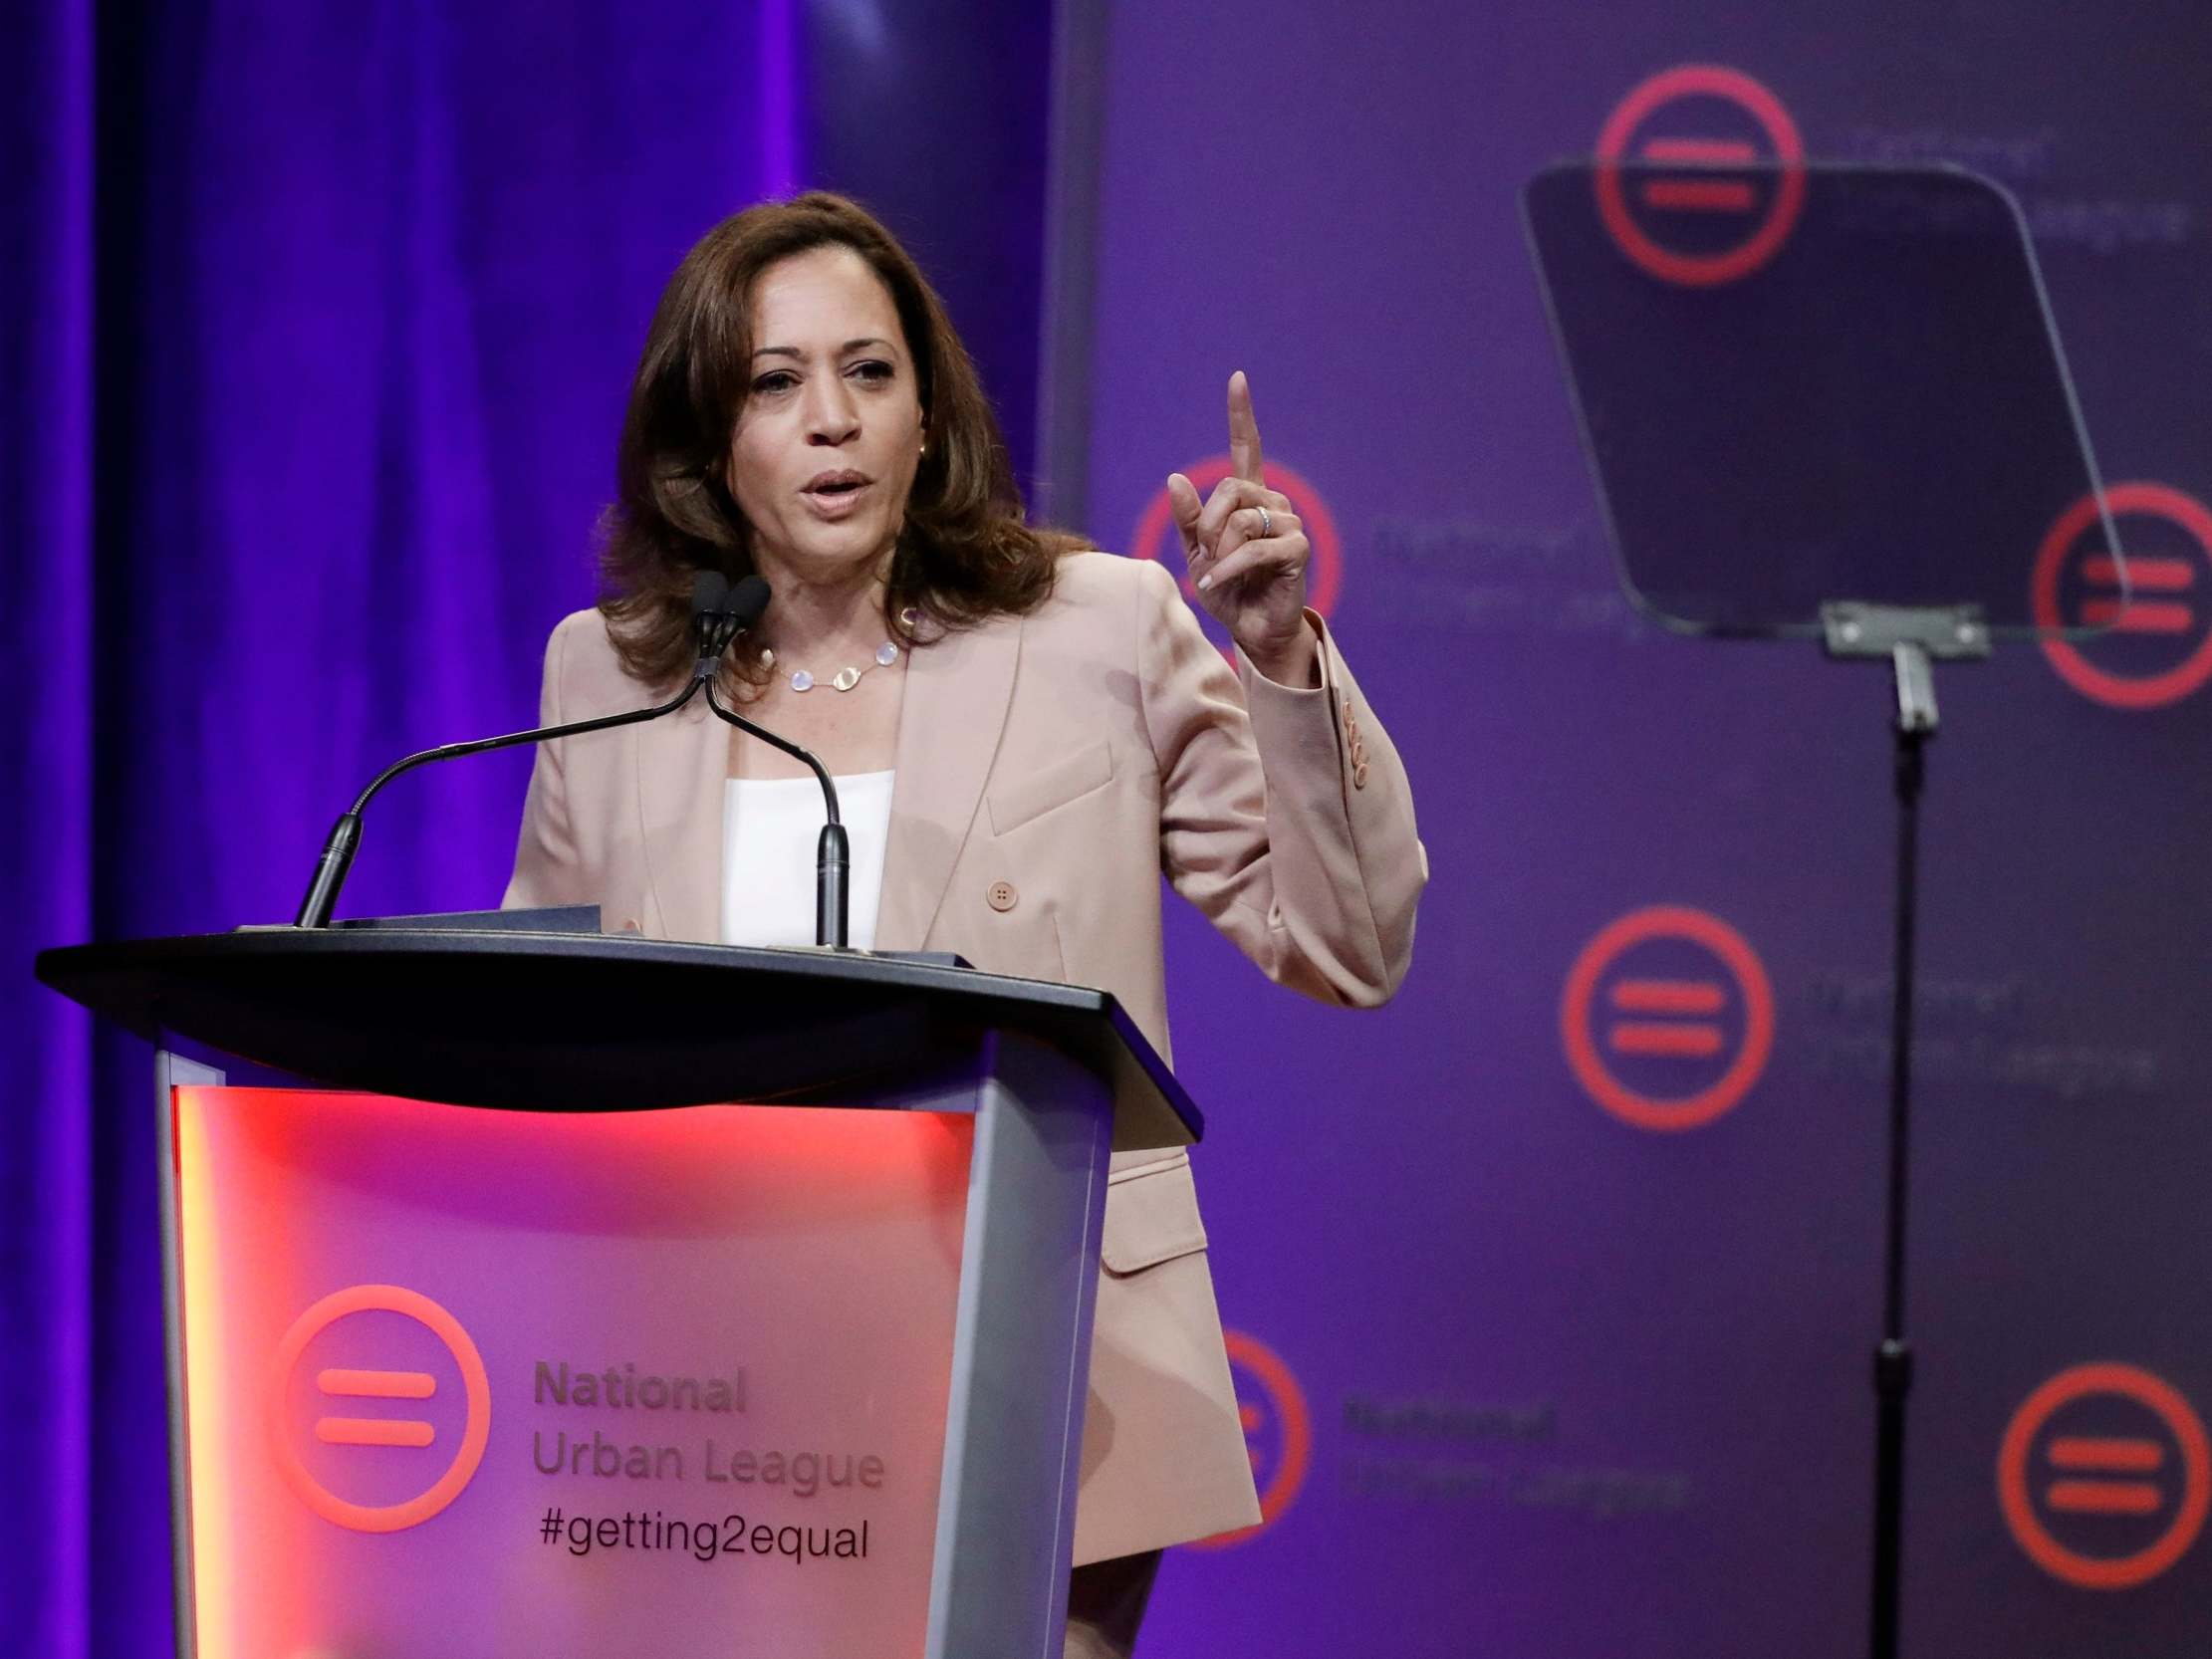 Kamala Harris hits back at Trump's racist comments: 'We're not going anywhere, except the White House